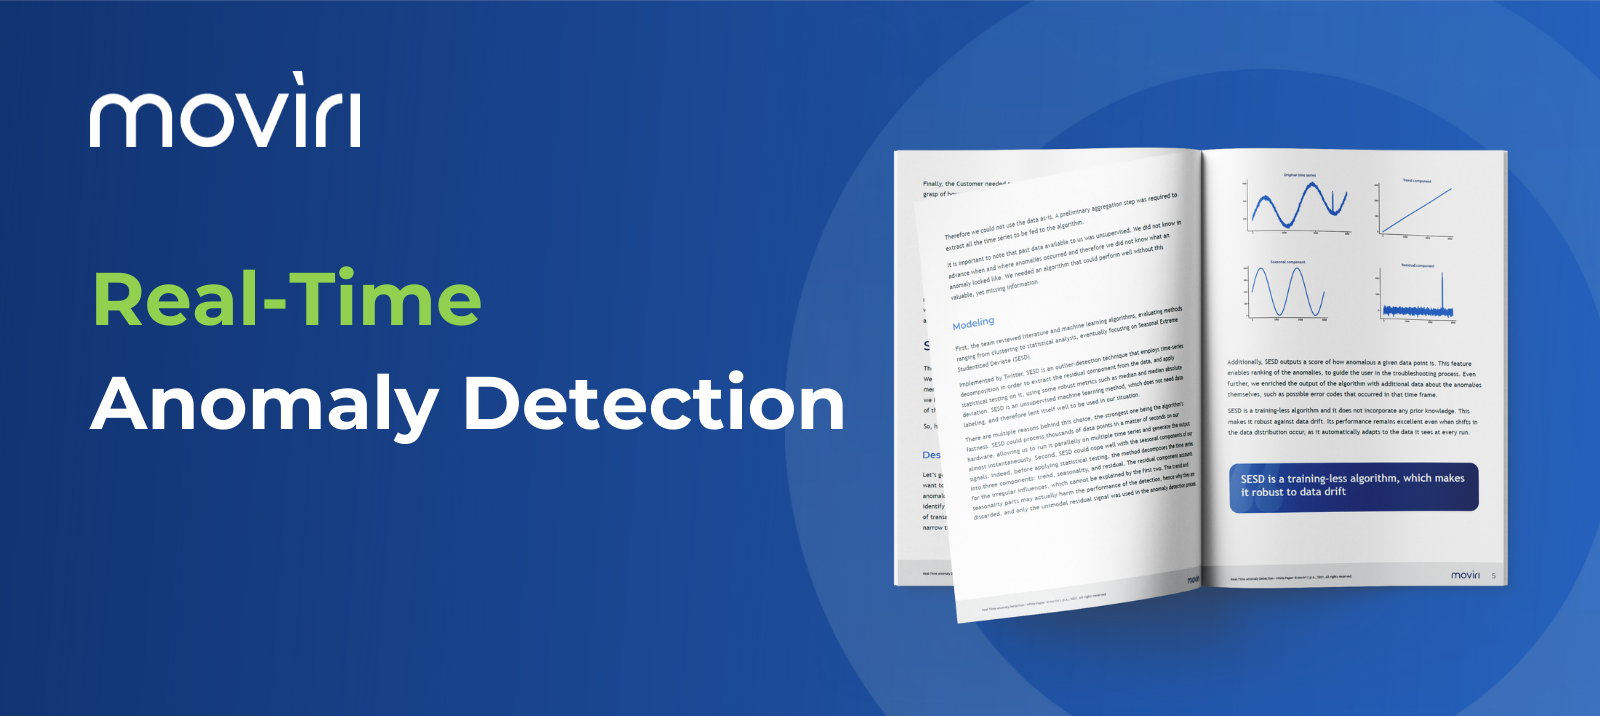 Moviri Real-Time Anomaly Detection White paper